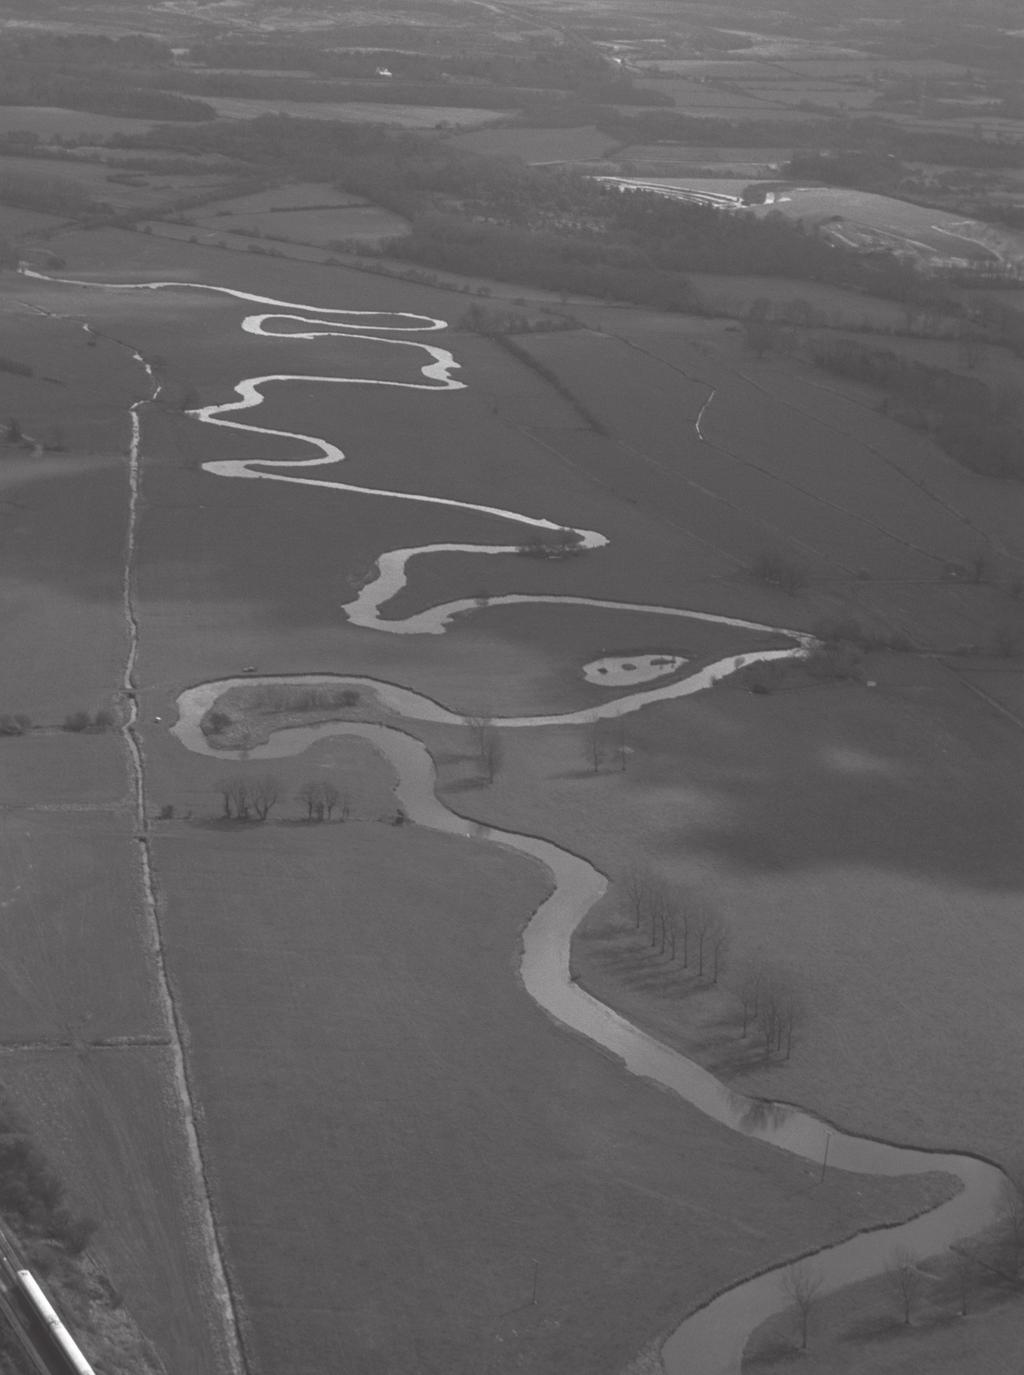 19 5 (b) (i) Study Figure 10 on the insert, a photograph of the River Tees in its middle course. Figure 11 is a black and white copy of Figure 10.